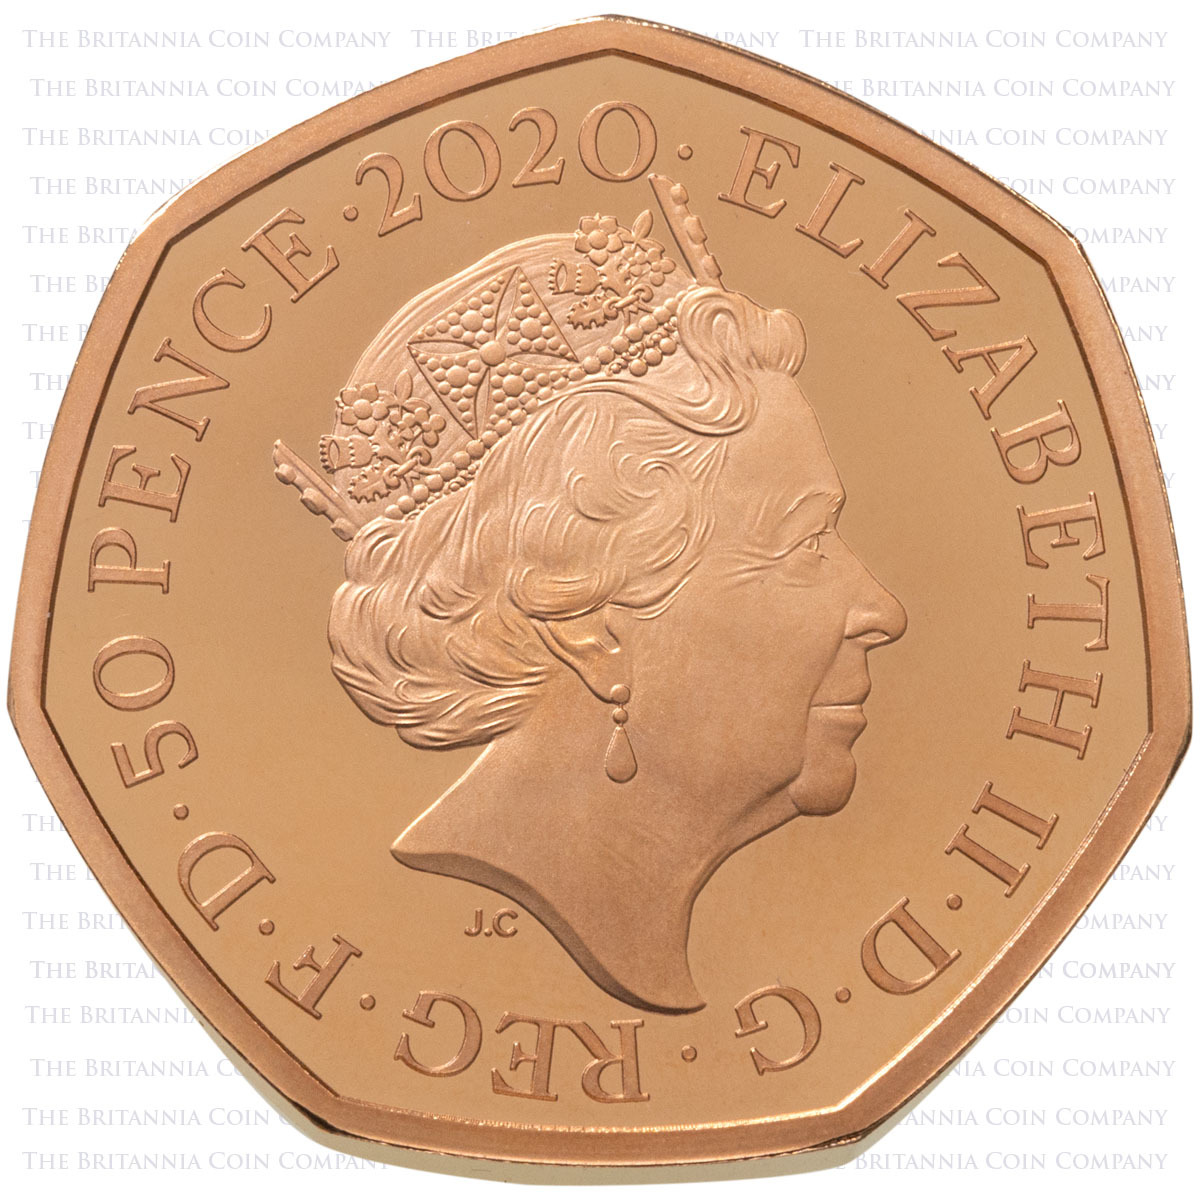 UK20BGPF 2020 Brexit EU European Union Withdrawal Peace Prosperity And Friendship Fifty Pence Piedfort Gold Proof Coin Obverse